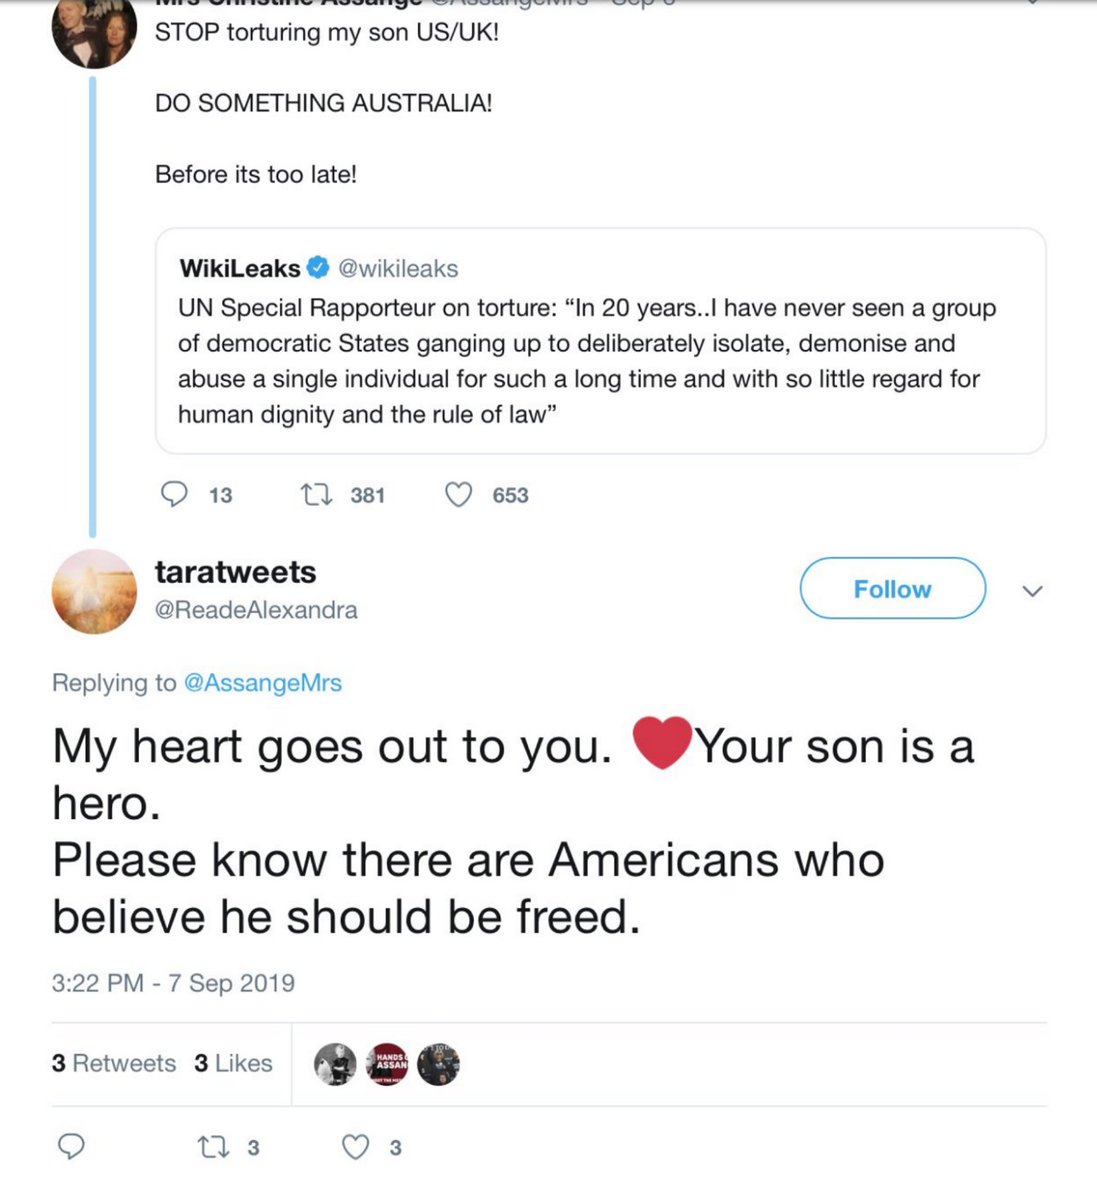 To end this thread on Tara Reade, I'll leave you with this tweet she made in Sept. of 2019 to the parents of Julian Assange, calling the accused rapist a "hero." She apparently doesn't "believe all women," does she? (END THREAD)